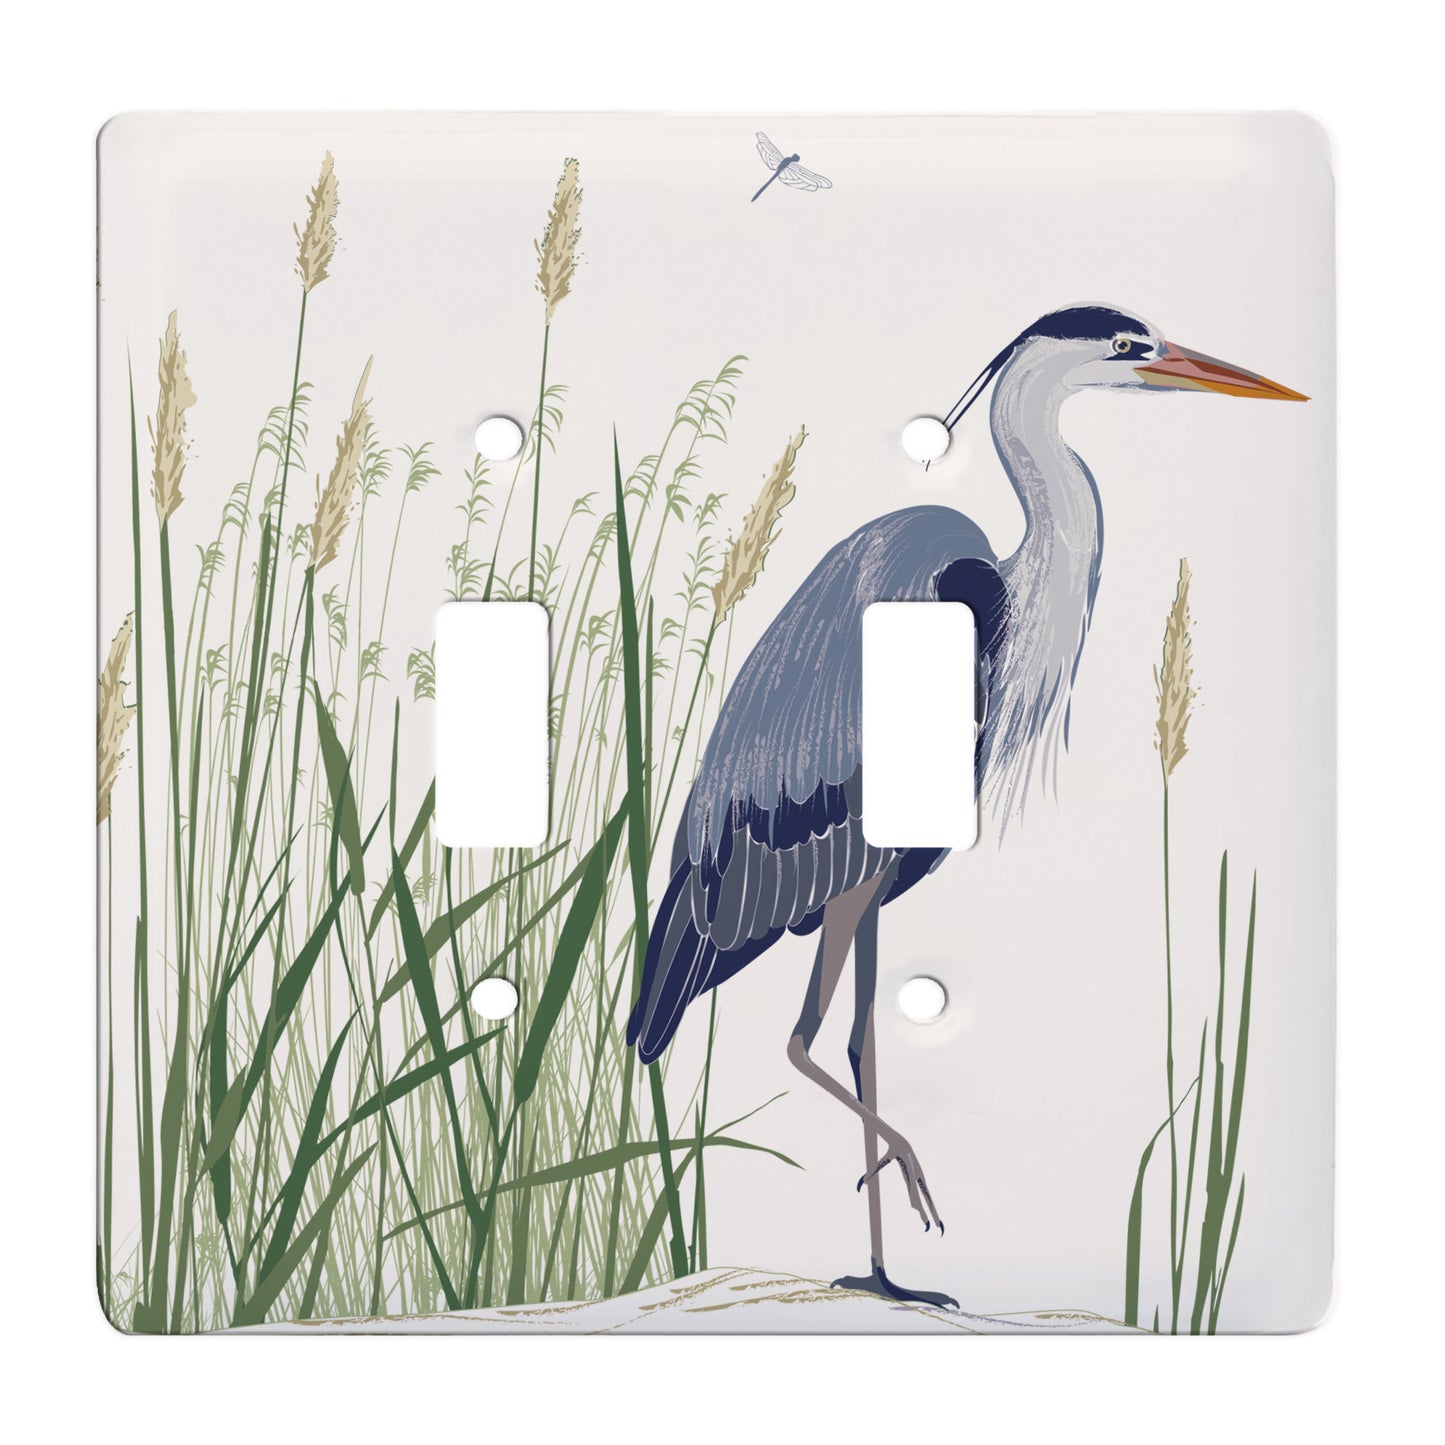 ceramic double toggle switchplate featuring a blue heron standing among grassy reeds. 